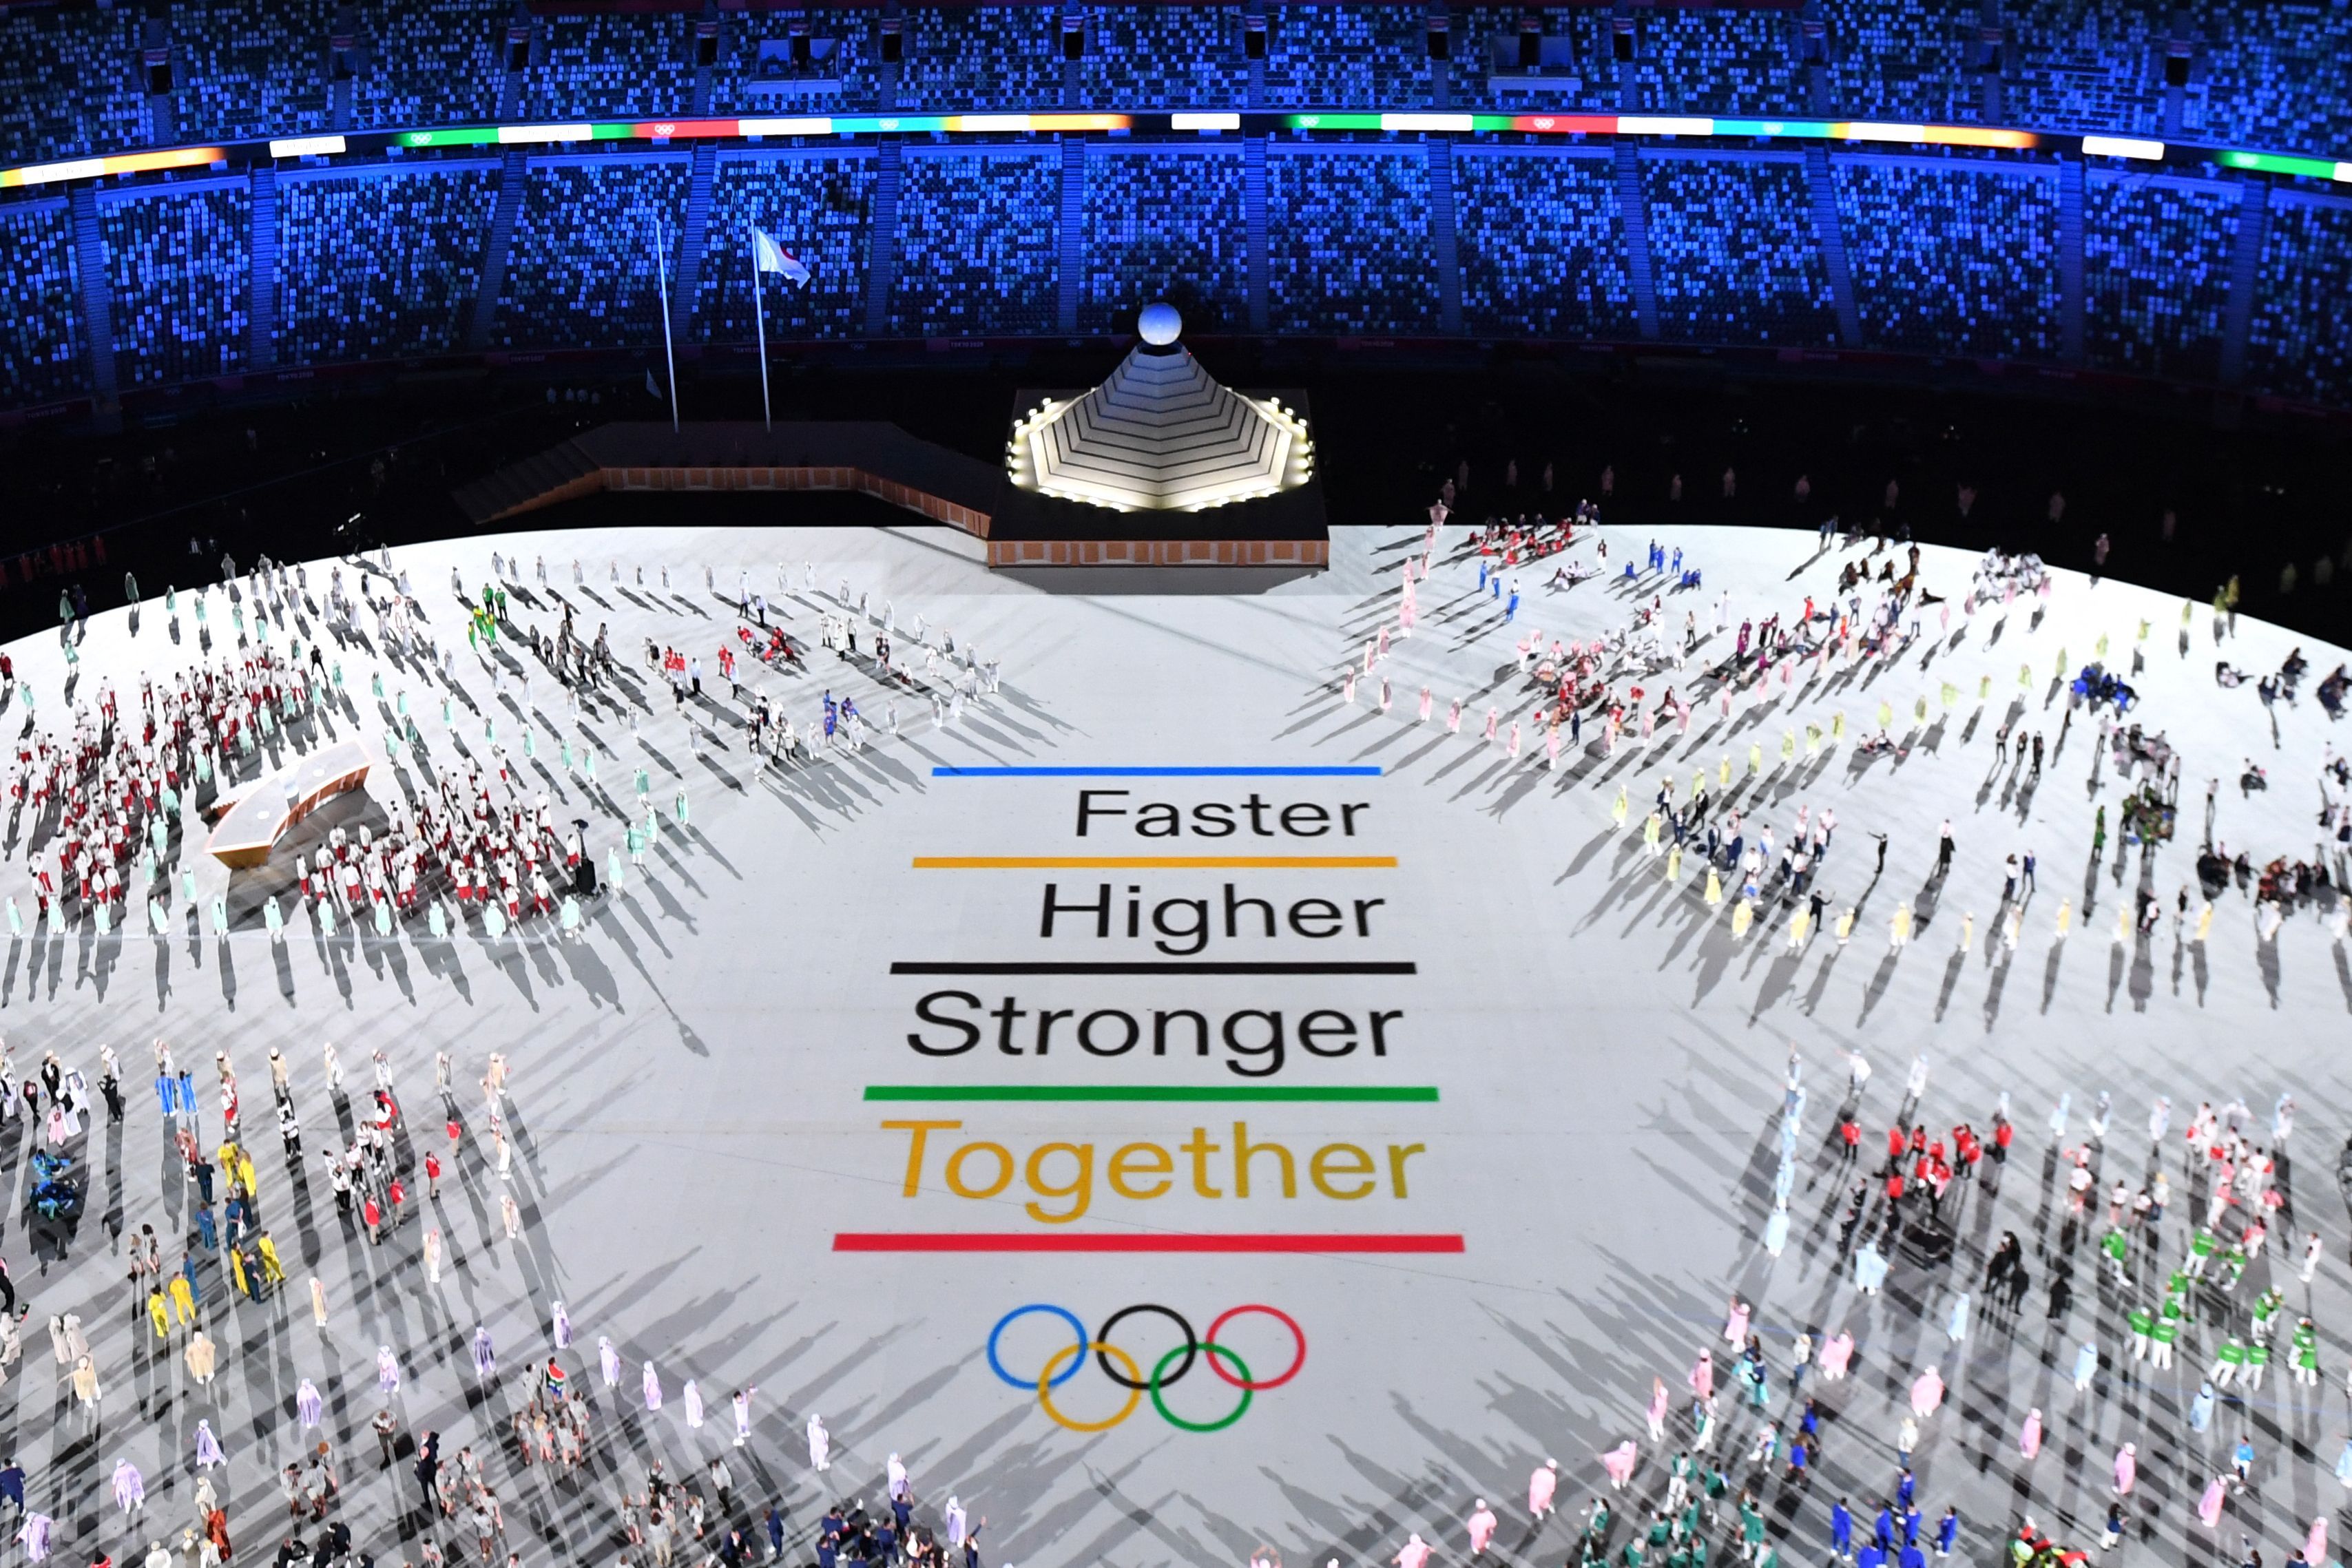 Photo of the Olympic stadium reflecting the Olympic slogan, "Faster, Higher, Stronger, Together."